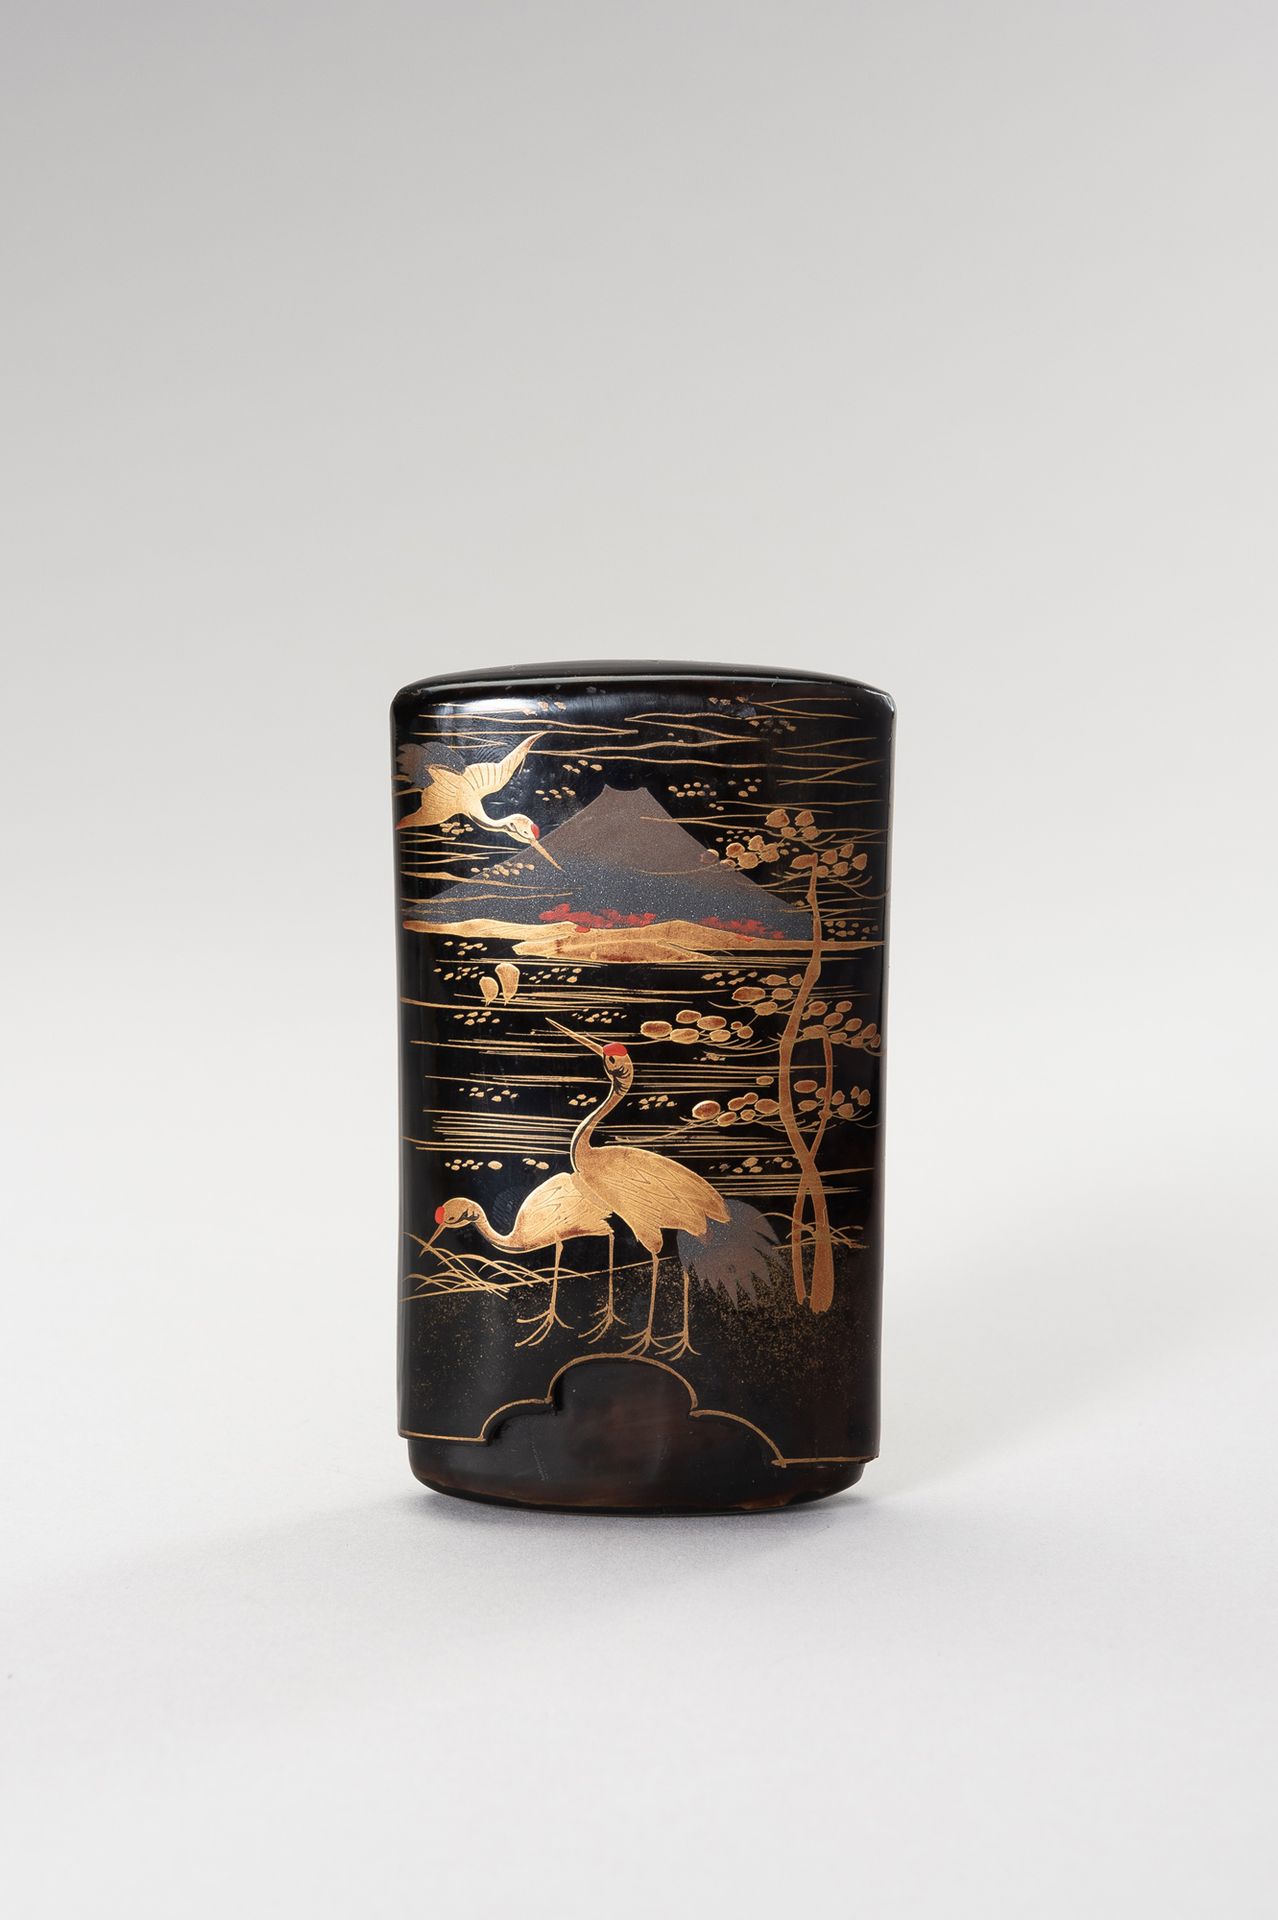 A FINE LACQUERED TORTOISESHELL CASE WITH MOUNT FUJI AND CRANES A FINE LACQUERED &hellip;